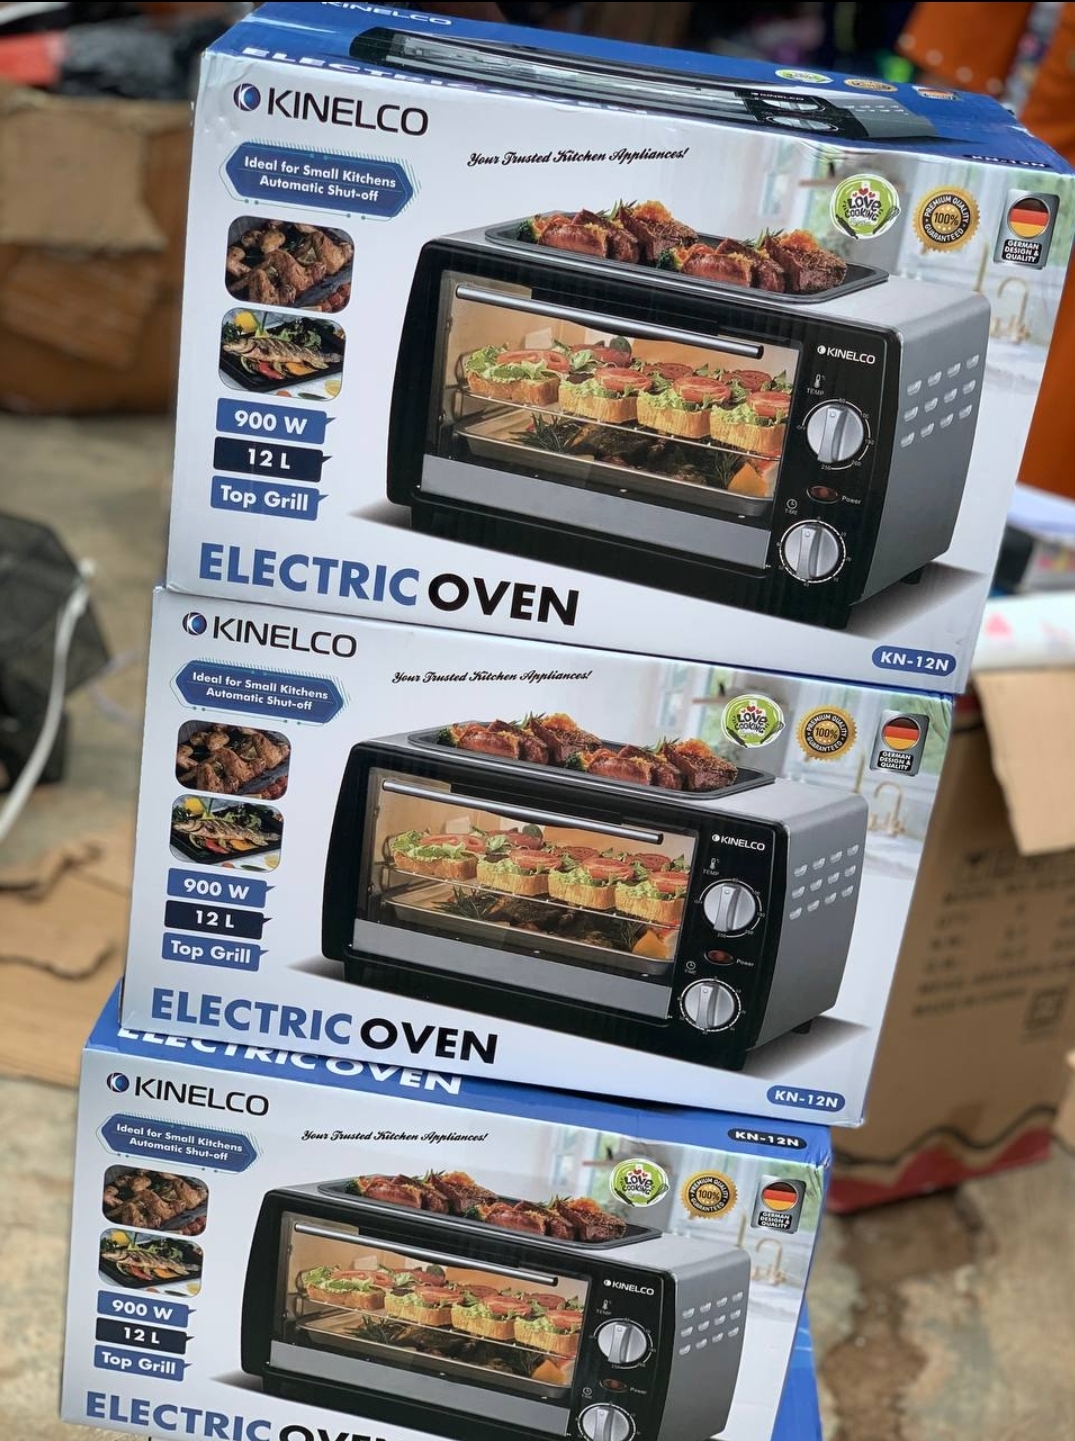 Kinelco 12 Liters Electric Oven with Griller